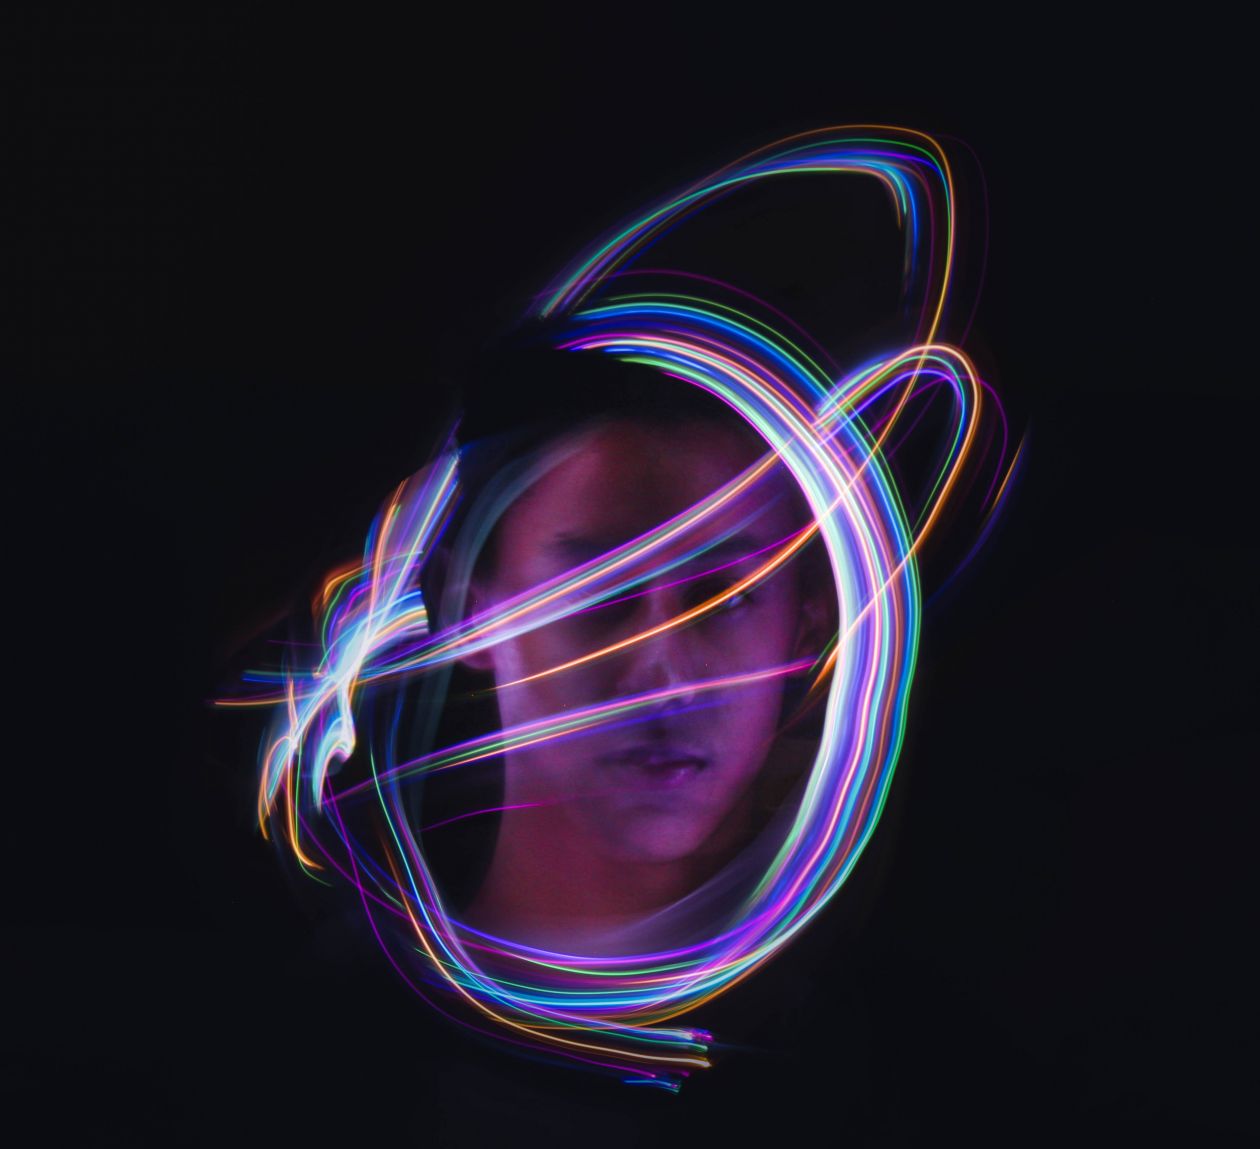 Image of a face on a black background with colourful lights swirling around them